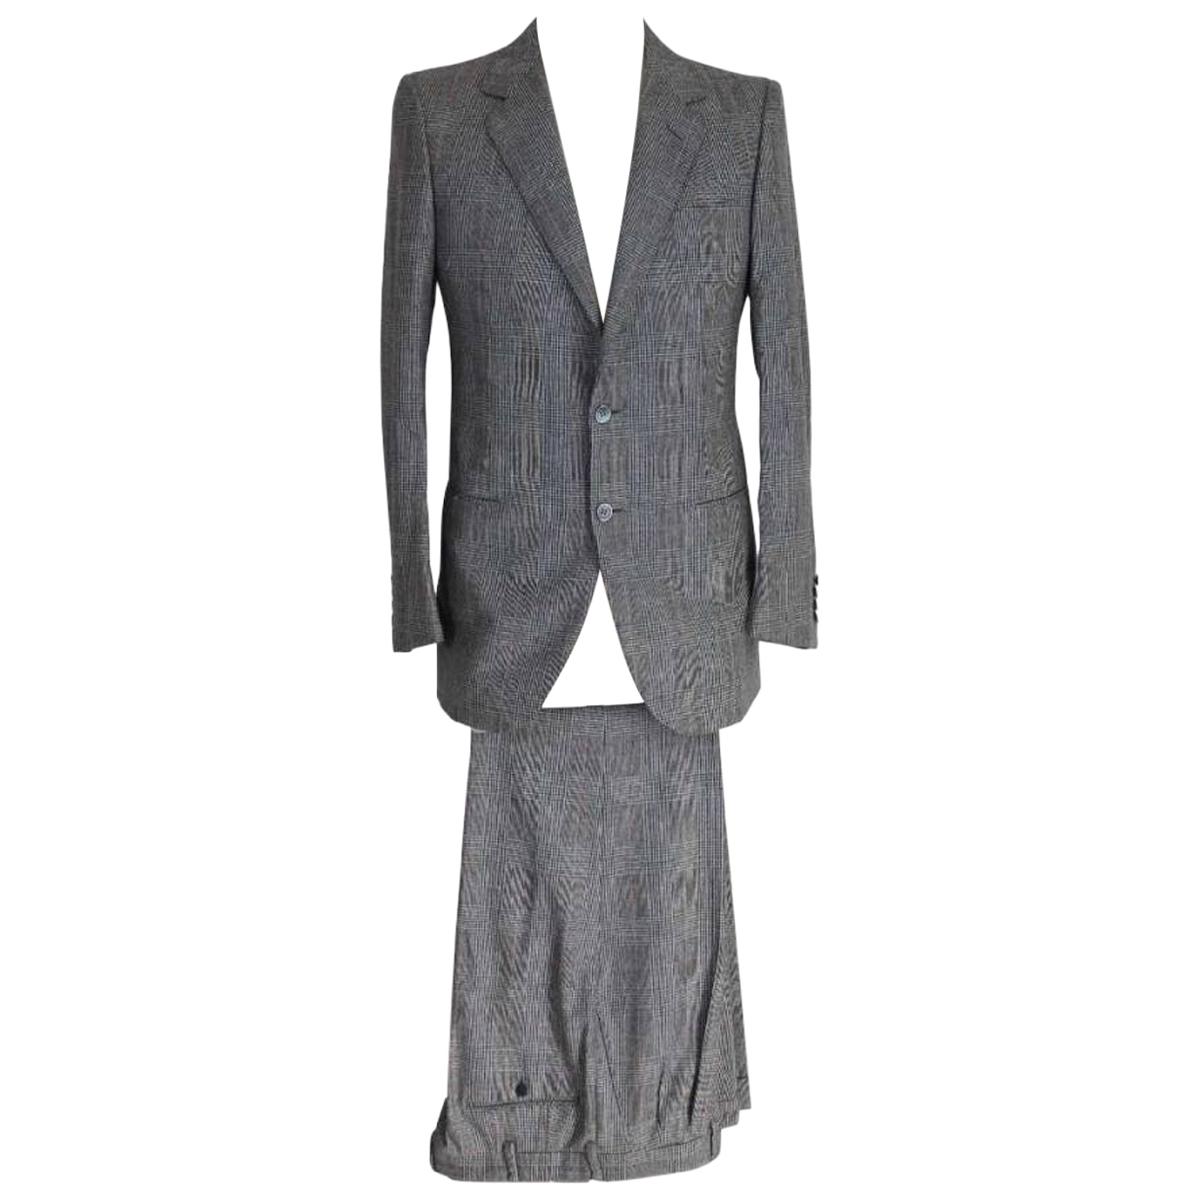 Brioni Gray Wool Prince Of Wales Pinstripe Suit Trousers and Jacket